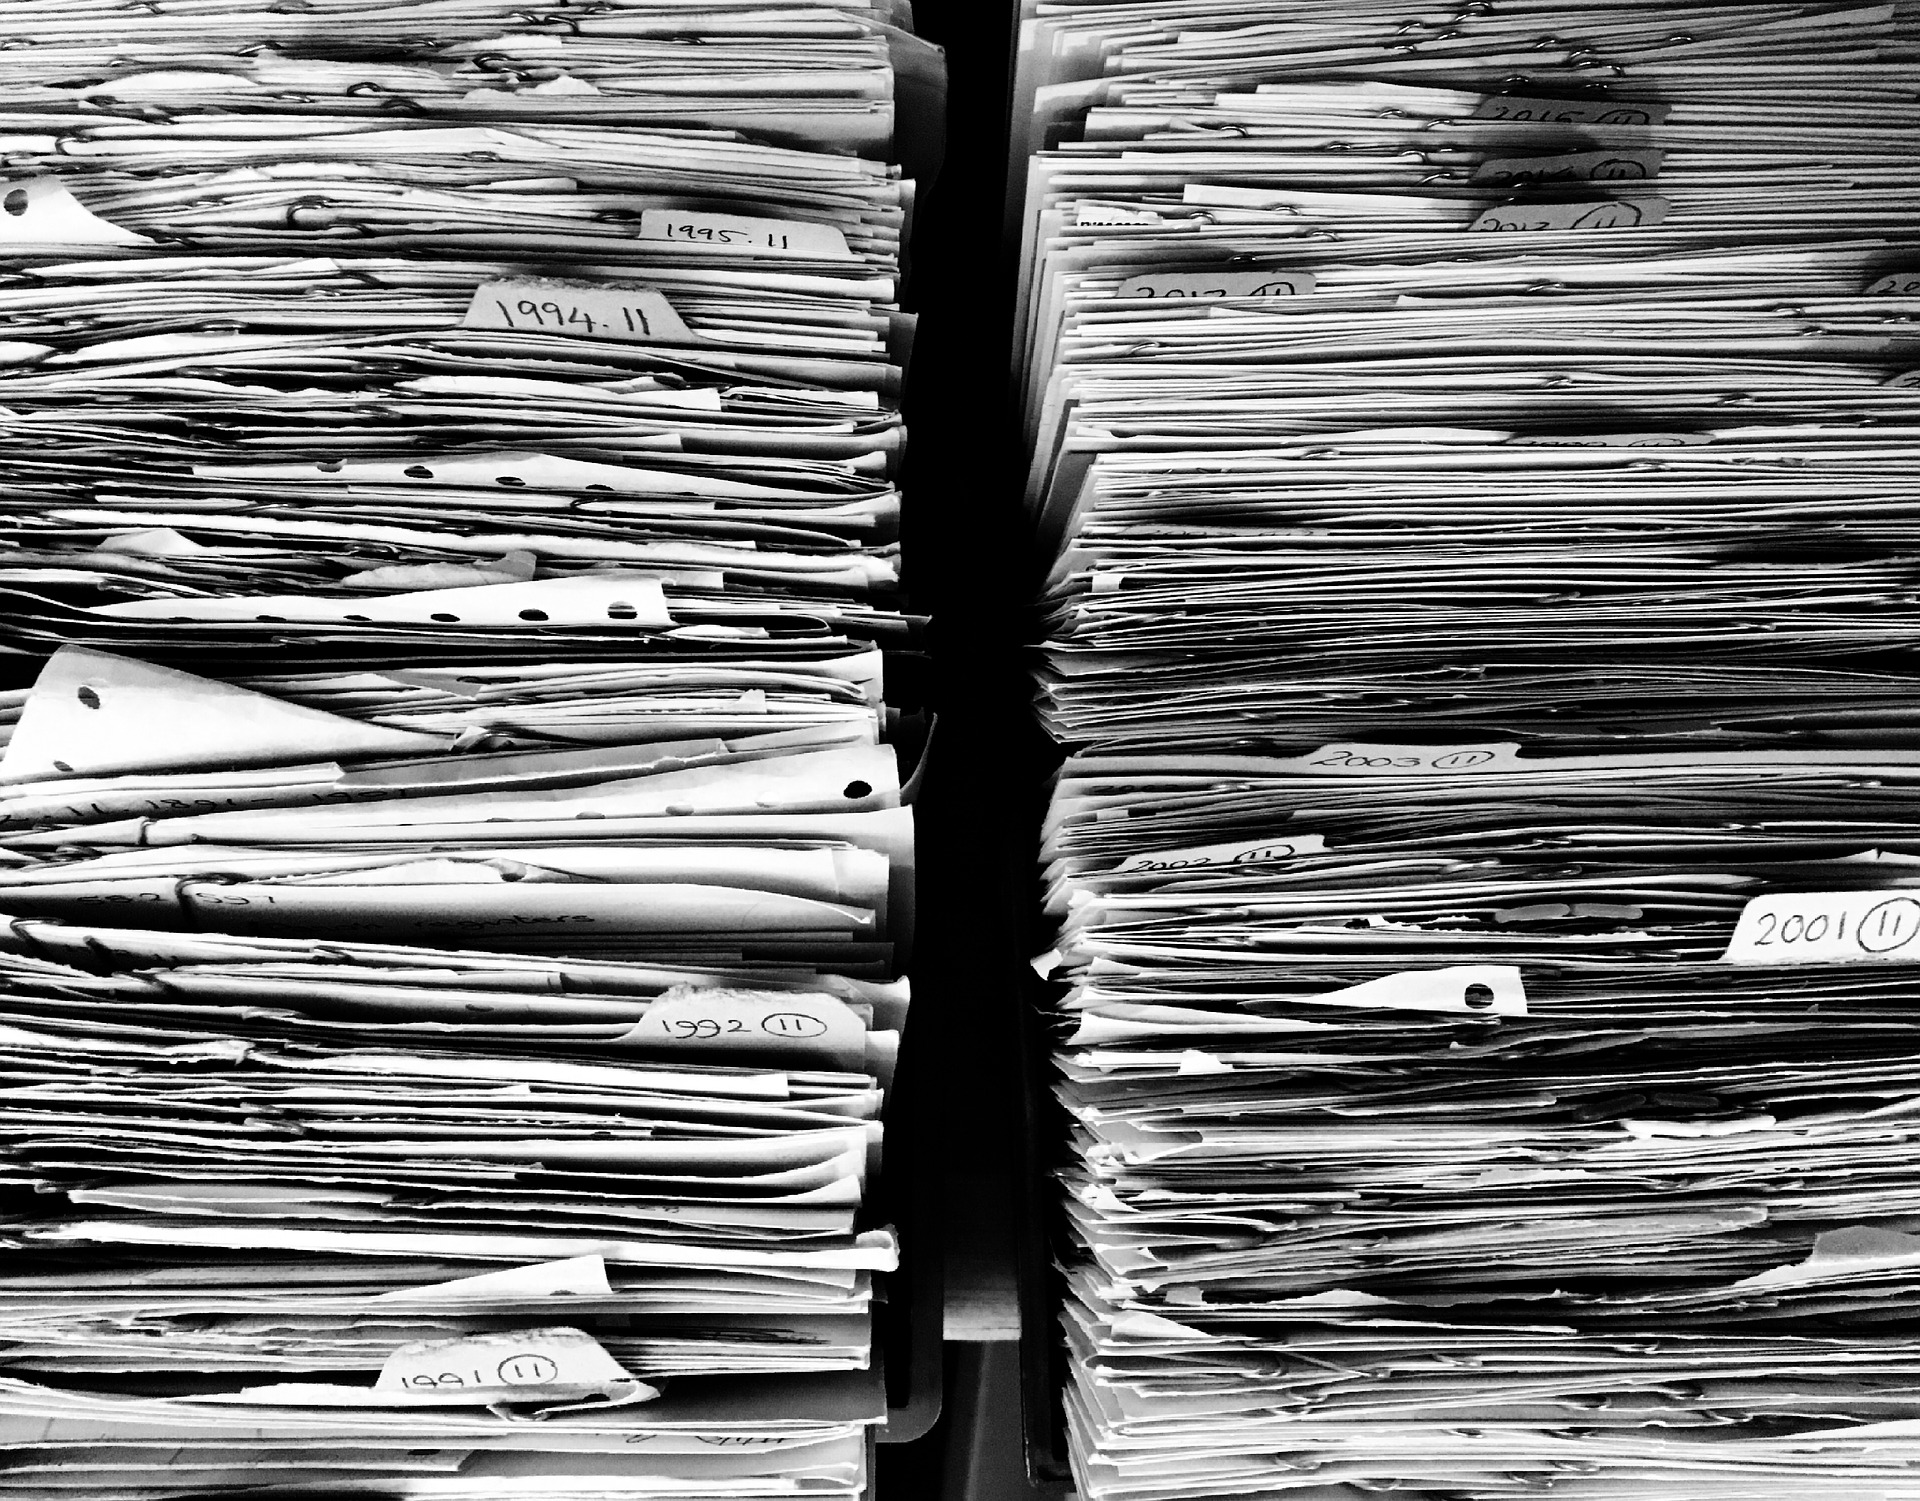 Stacks of papers with makers separating annual segments from the year 1991 to 2012.